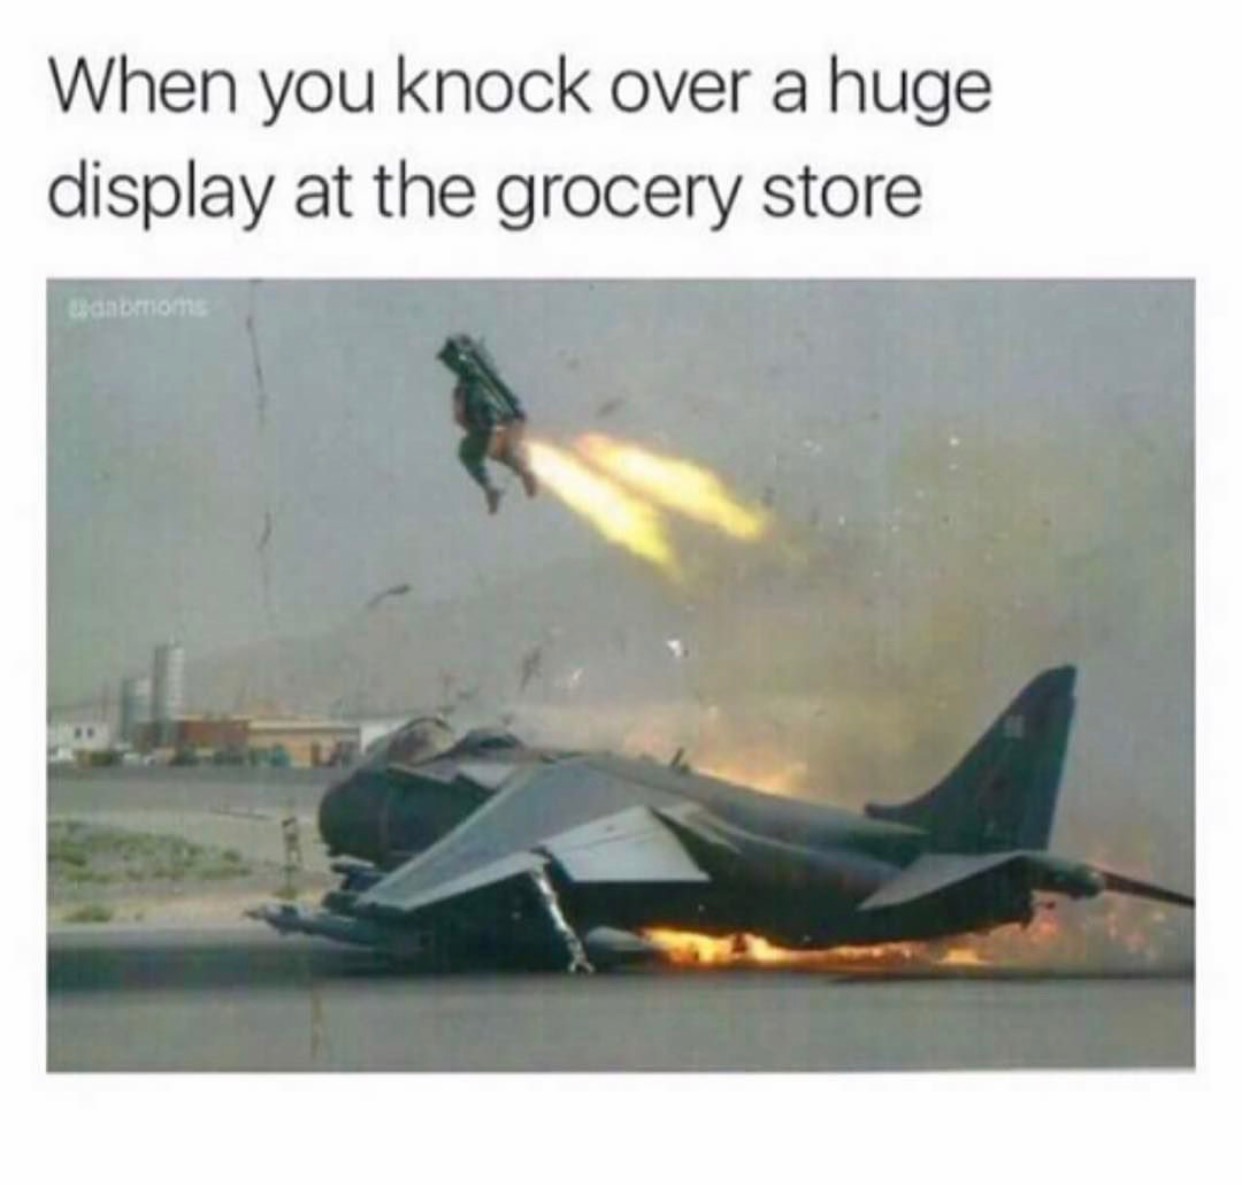 memes - pilot ejecting - When you knock over a huge display at the grocery store antion